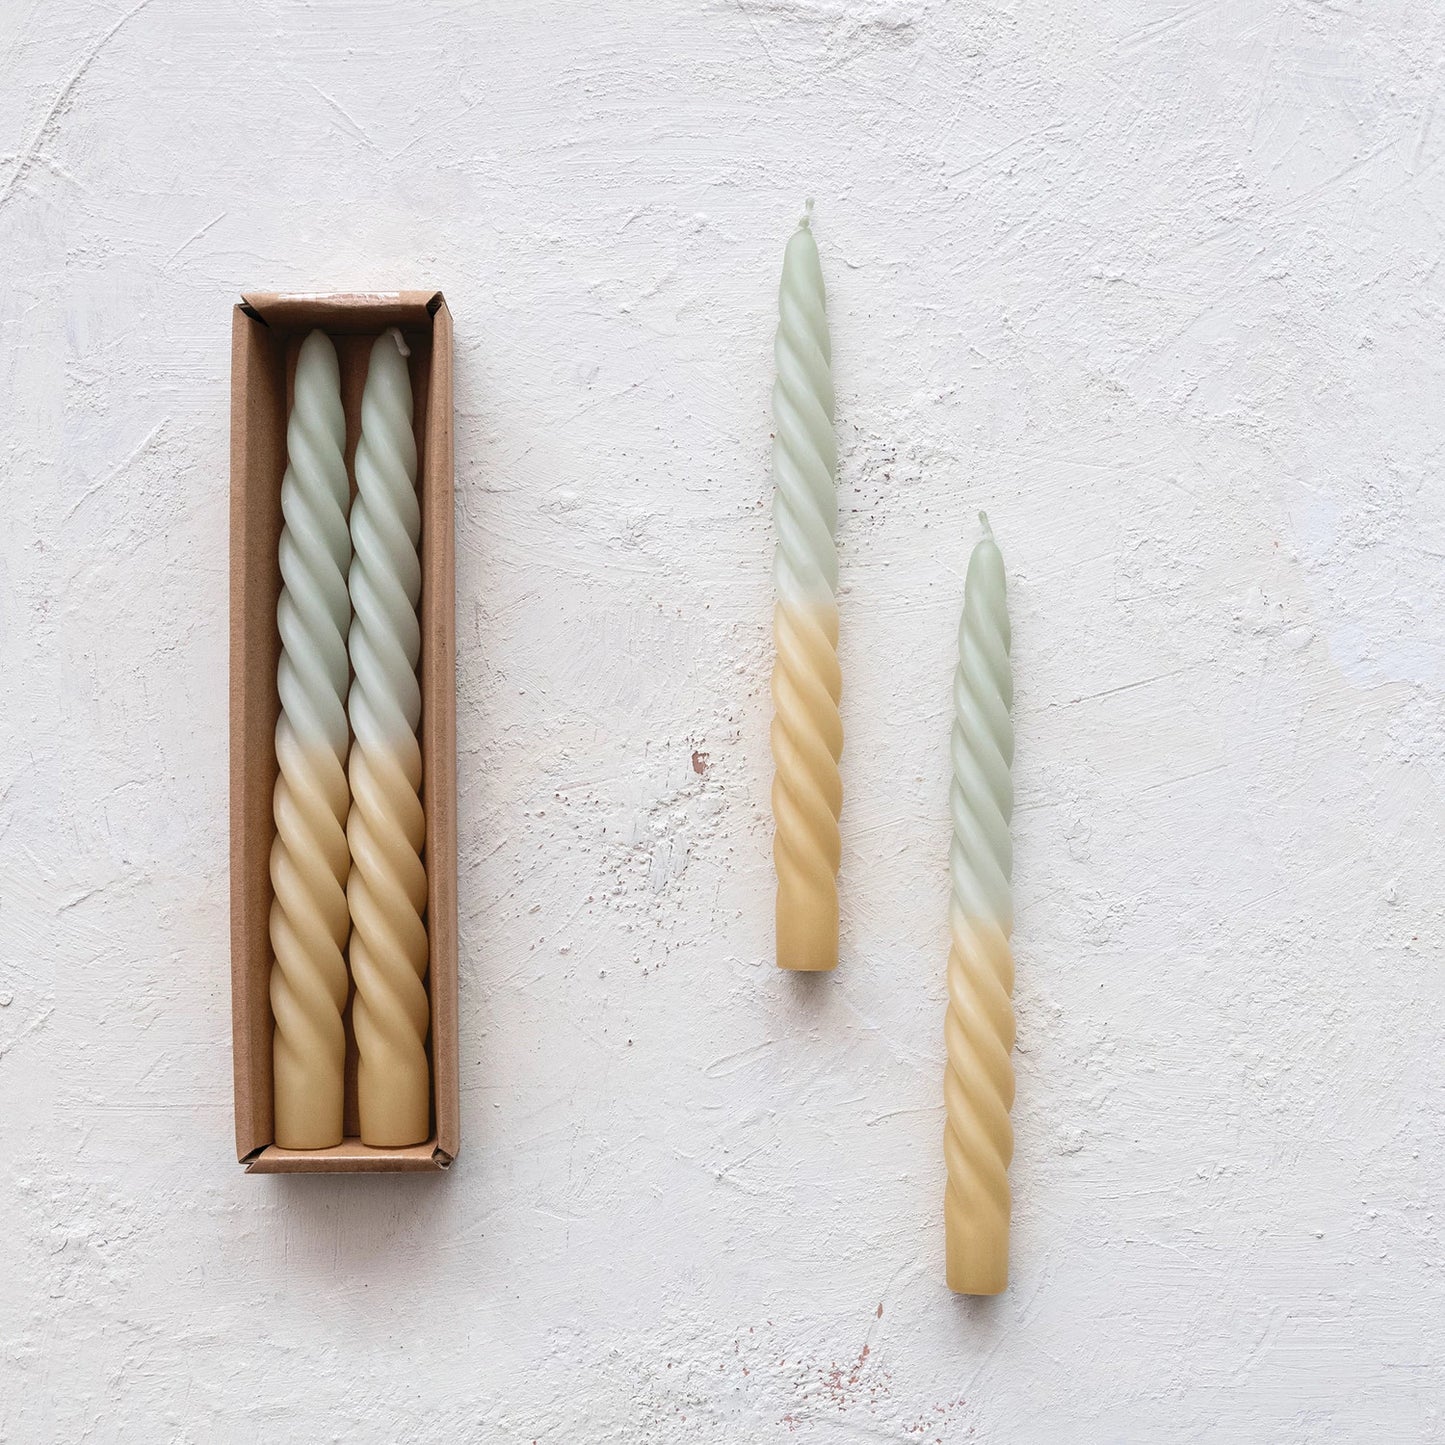 set of mint ombre twisted taper candle set next to a boxed set of candles on a plaster background.